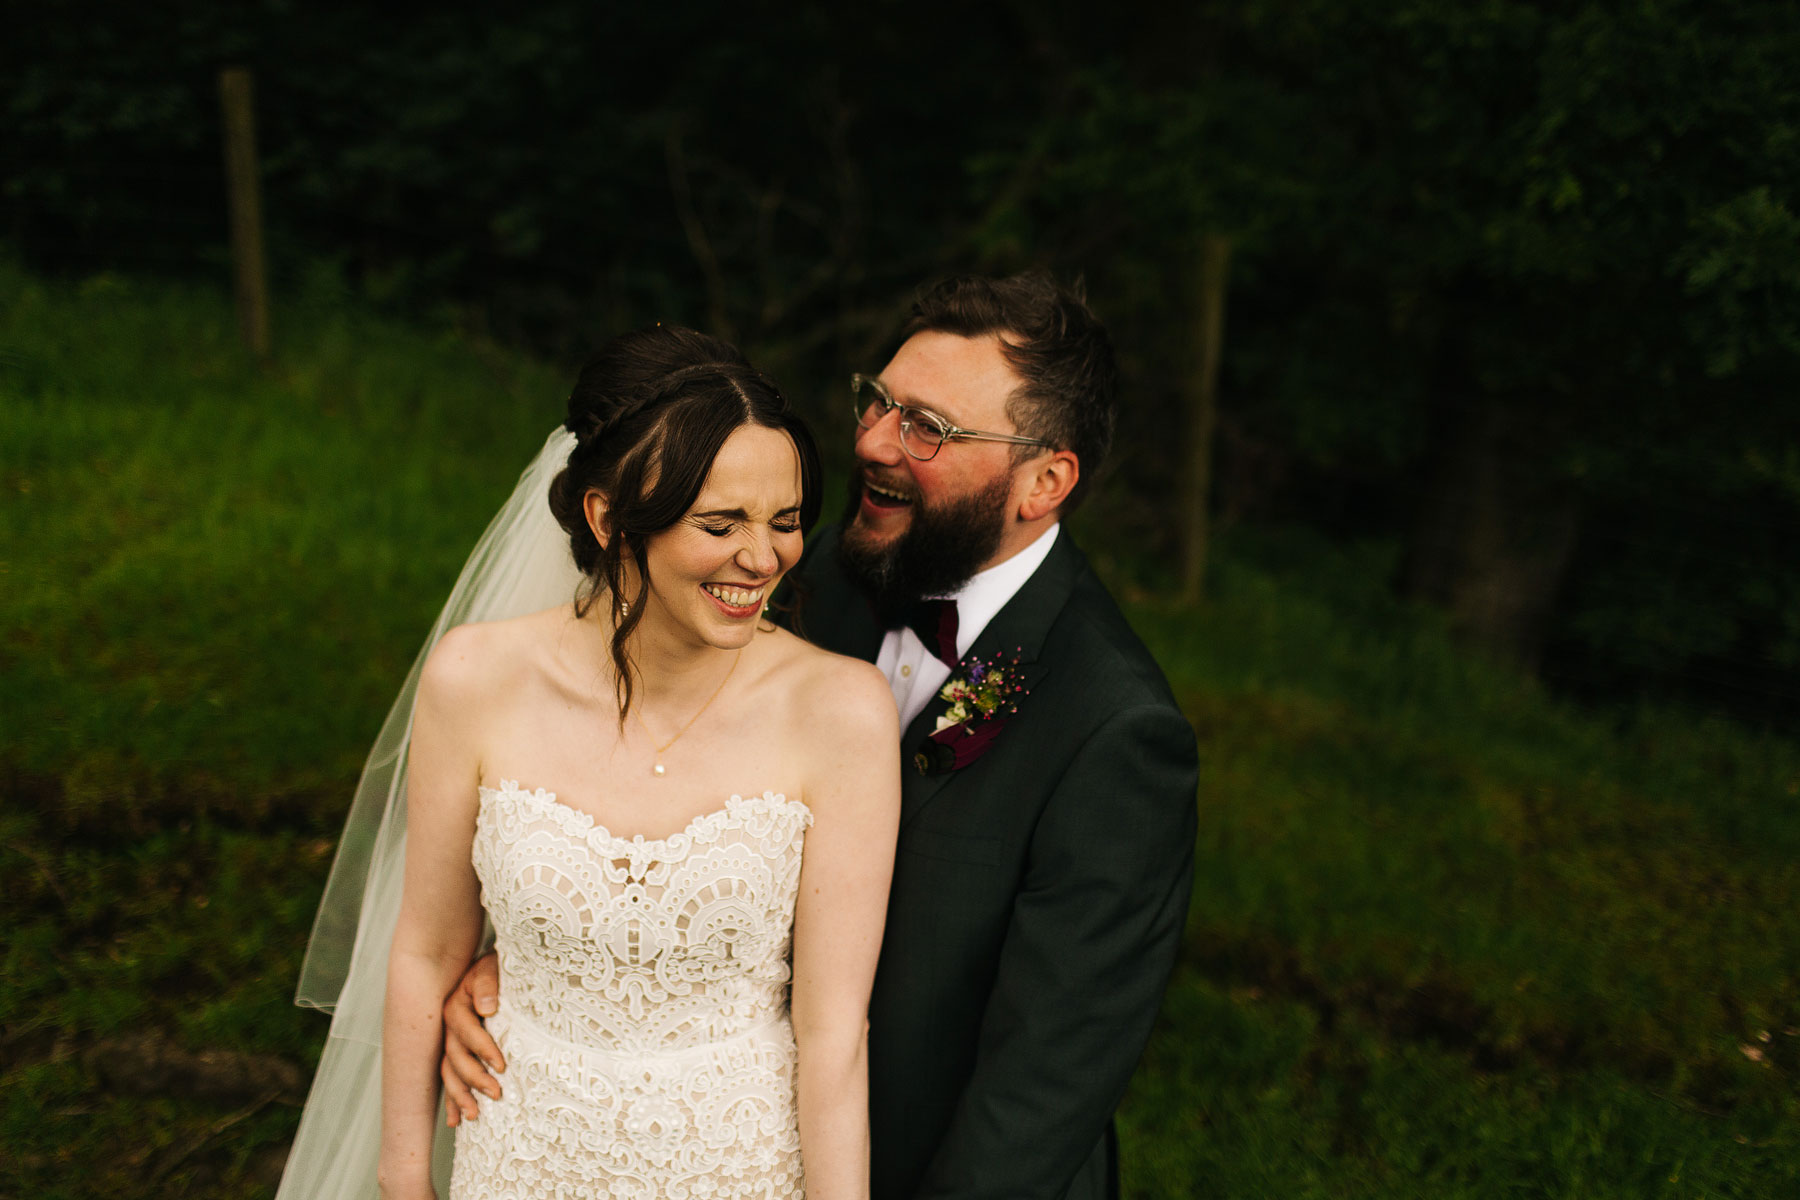 natural and relaxed wedding photography from yorkshire photographers